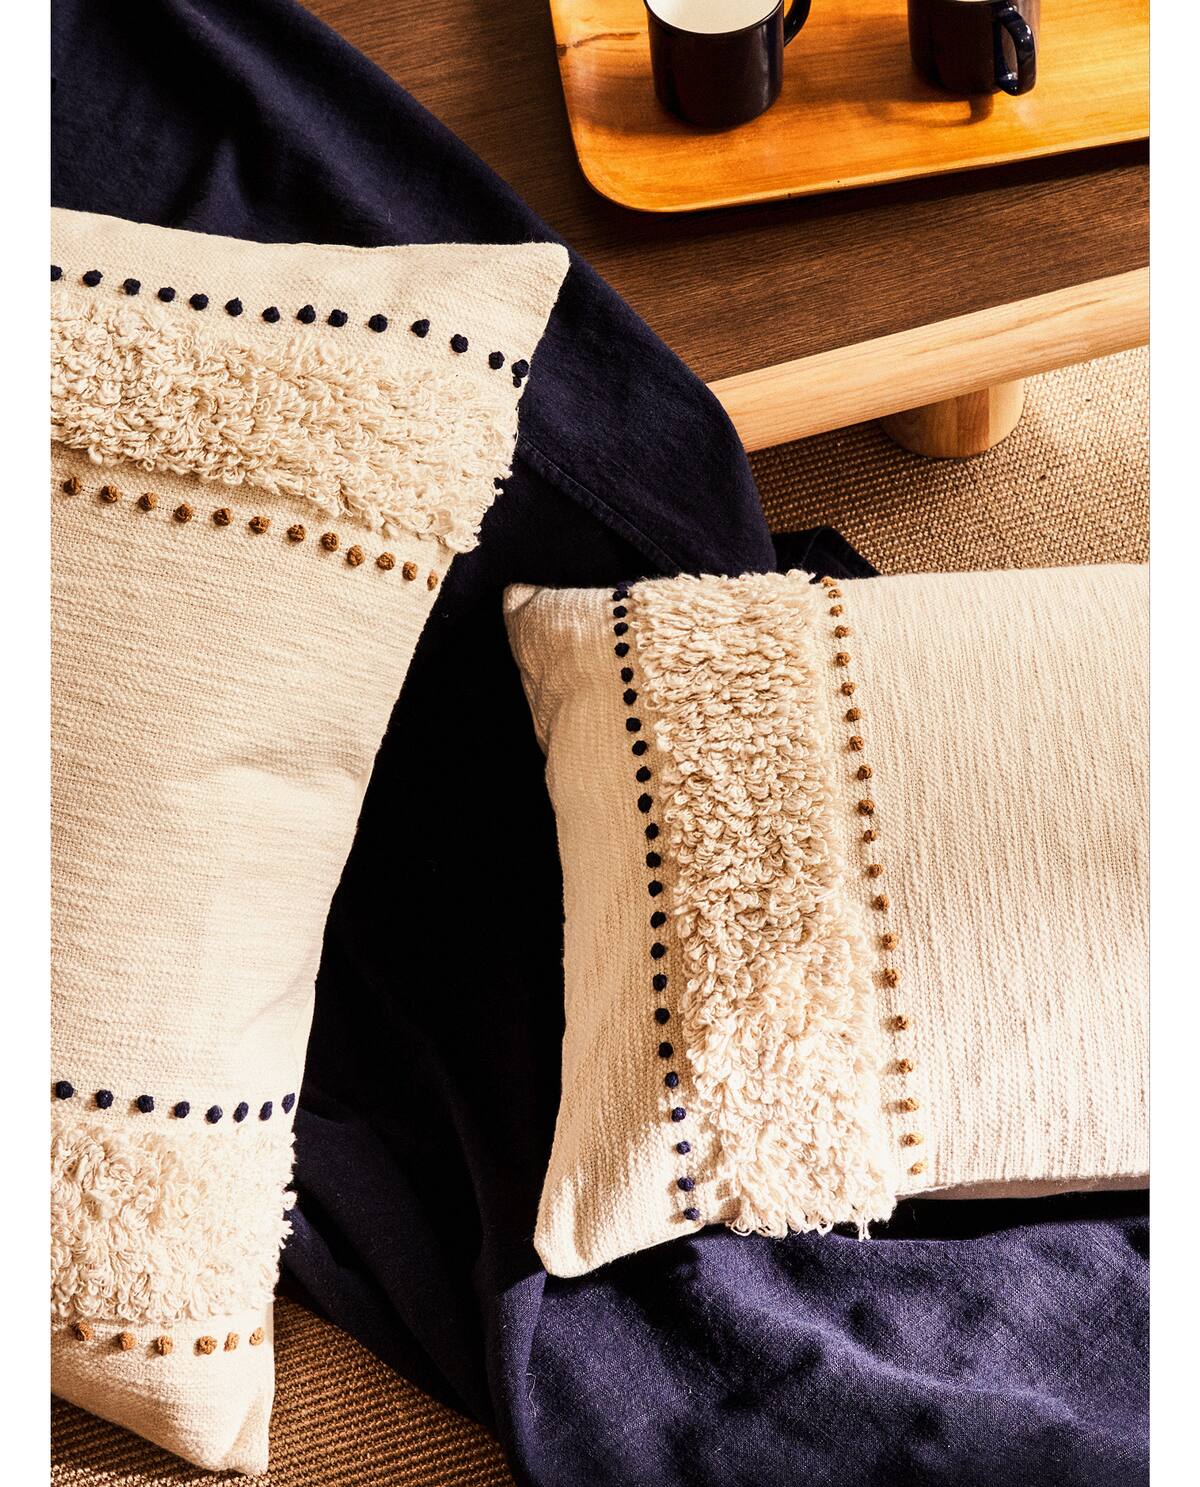 Textured-pillow-covers-in-a-comfy-living-space-76077